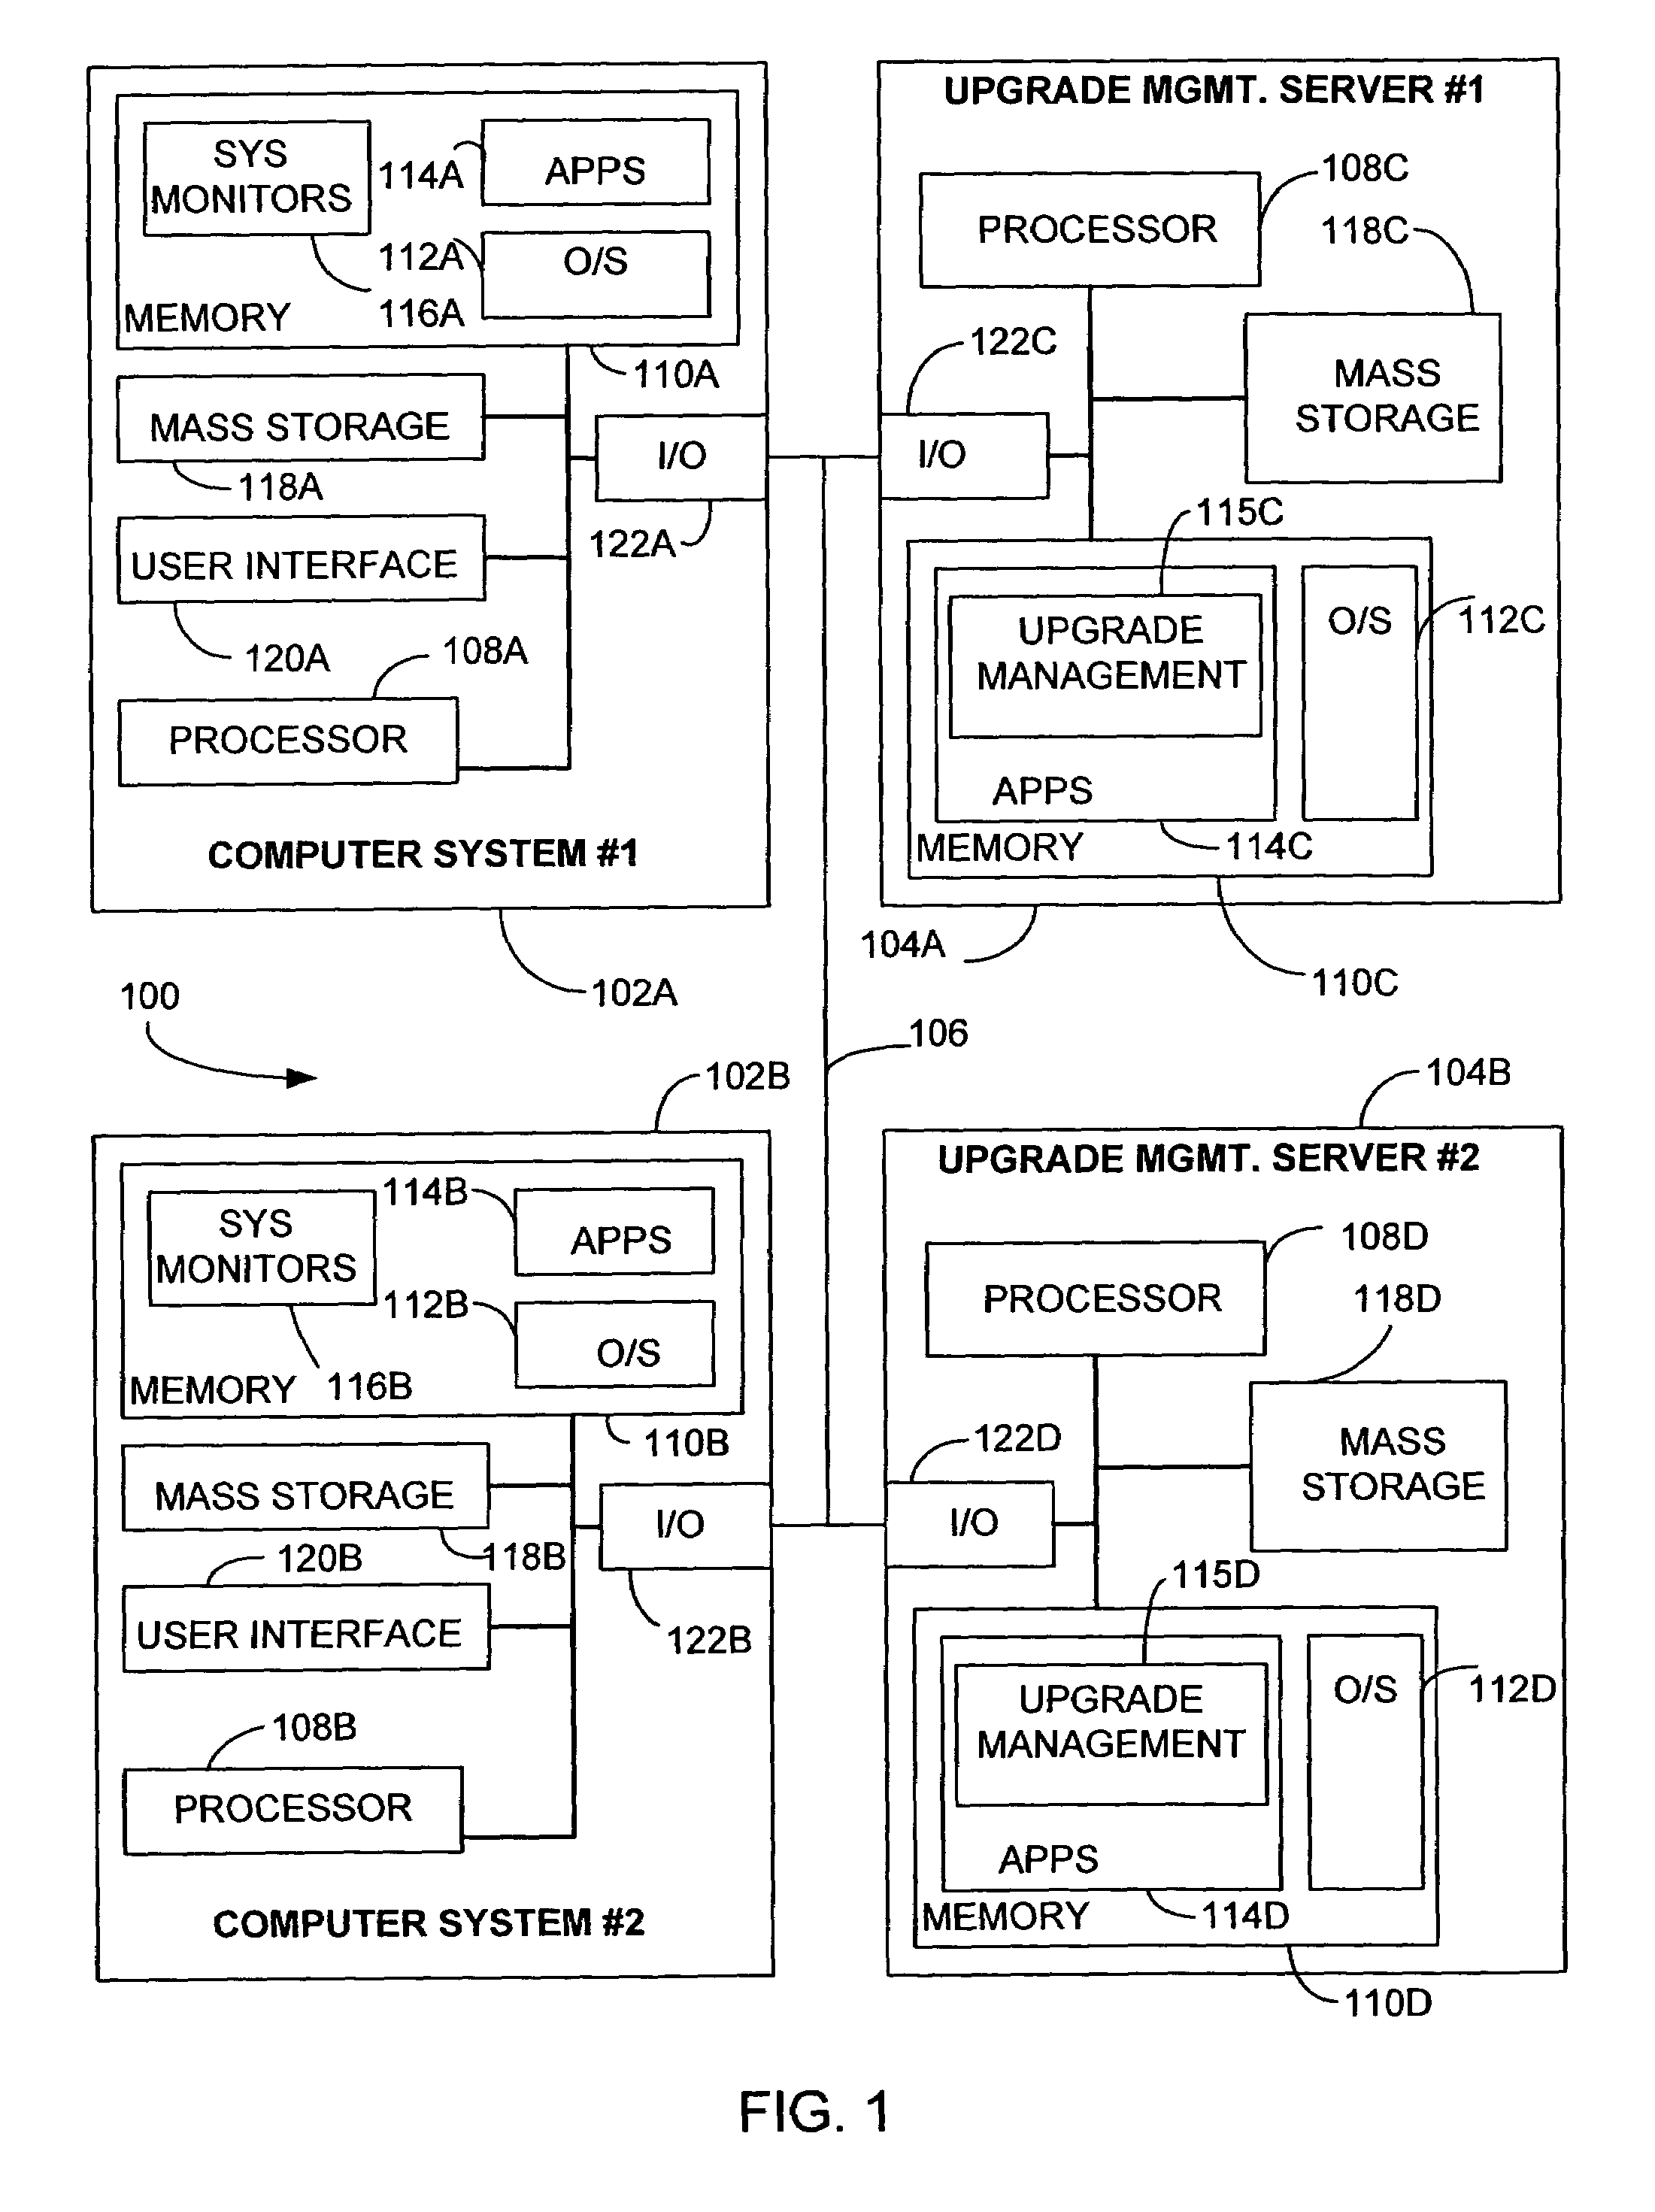 Computer application and methods for autonomic upgrade maintenance of computer hardware, operating systems and application software